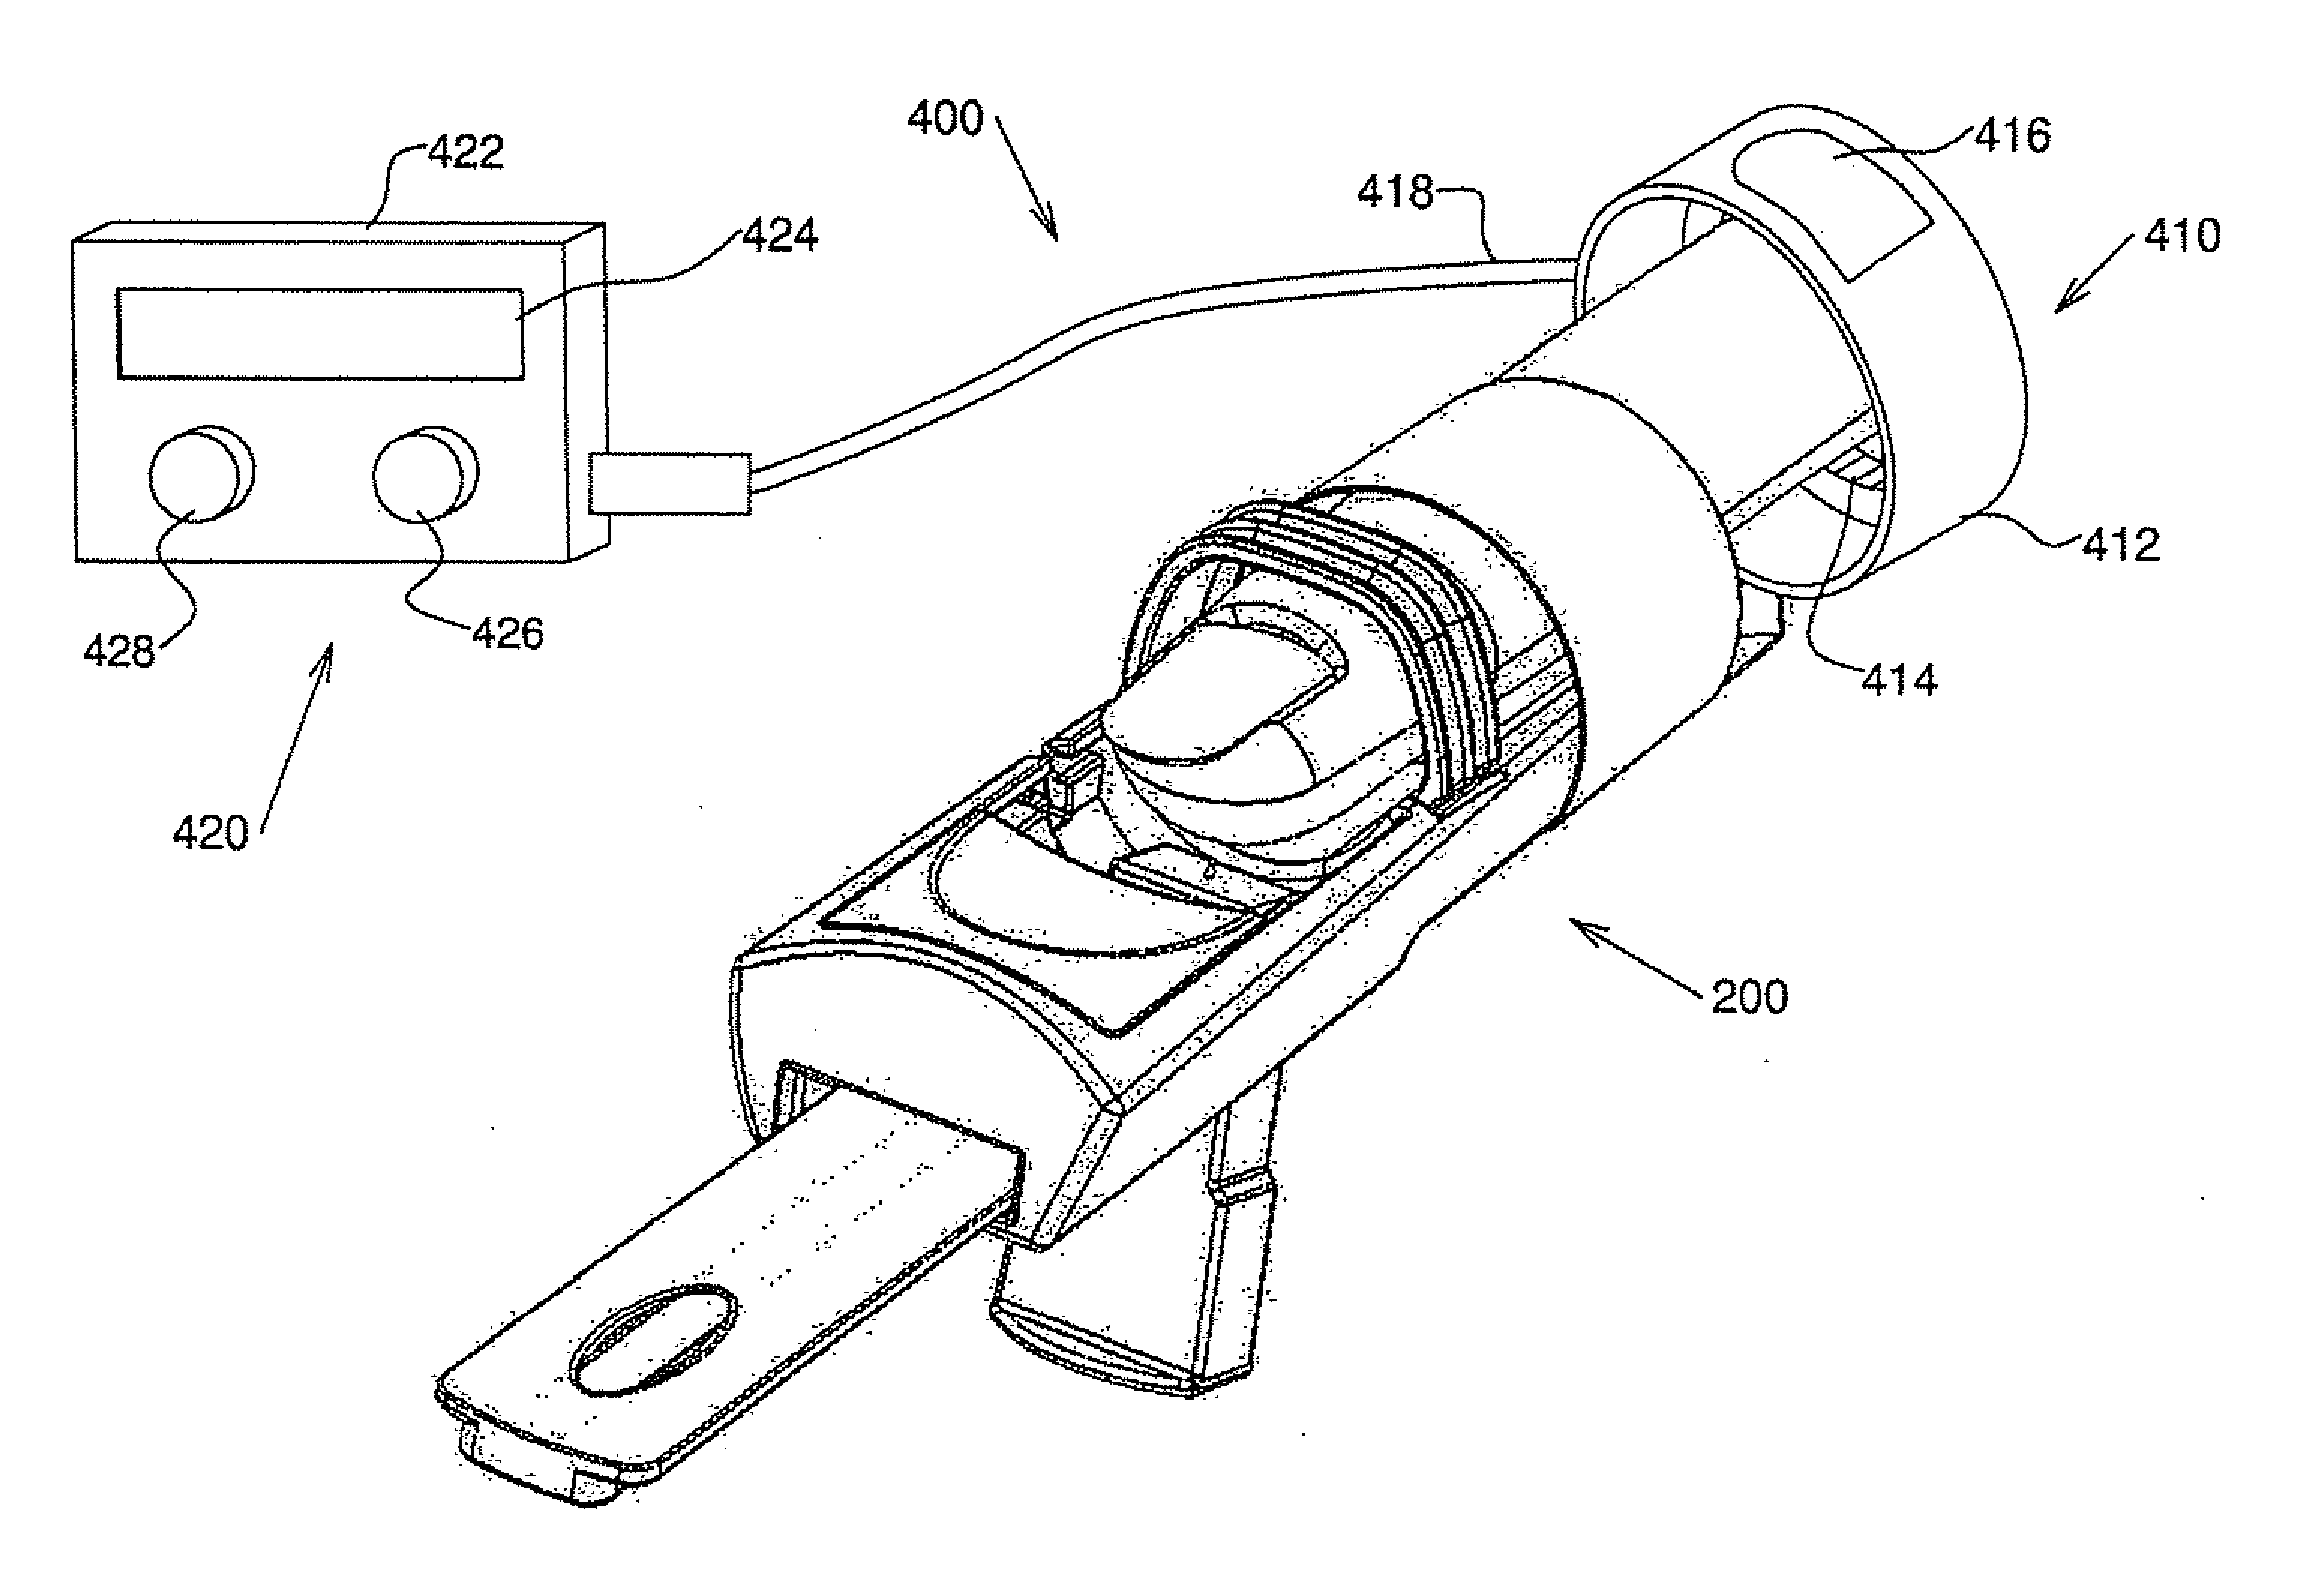 Devices and methods for reduced-pain blood sampling